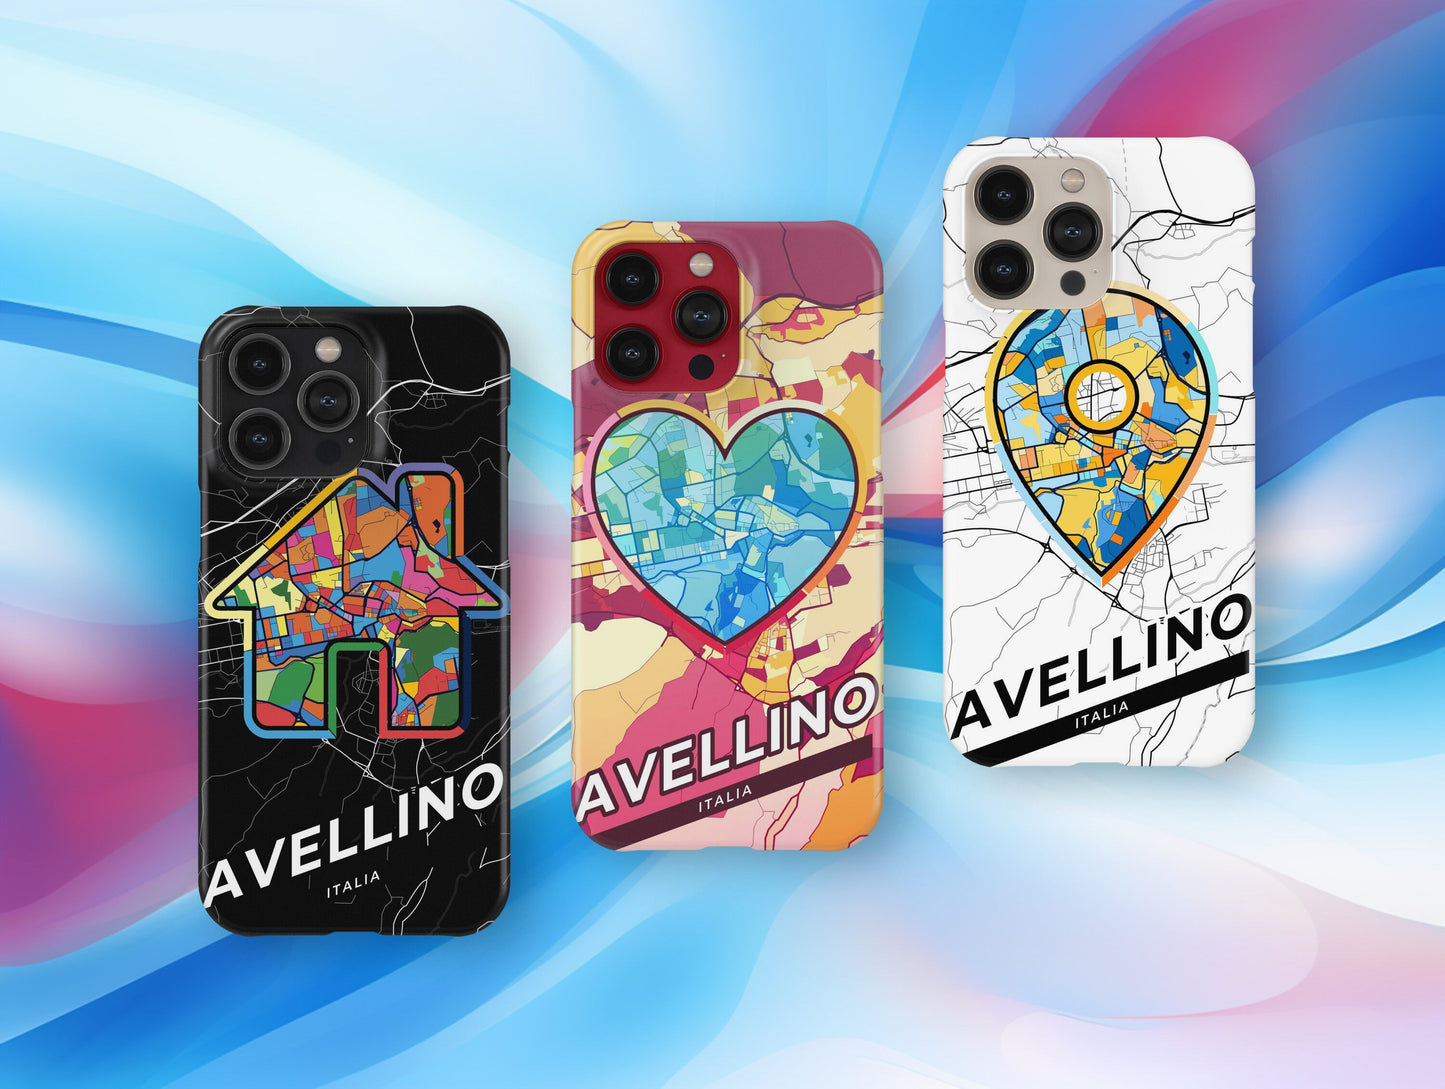 Avellino Italy slim phone case with colorful icon. Birthday, wedding or housewarming gift. Couple match cases.